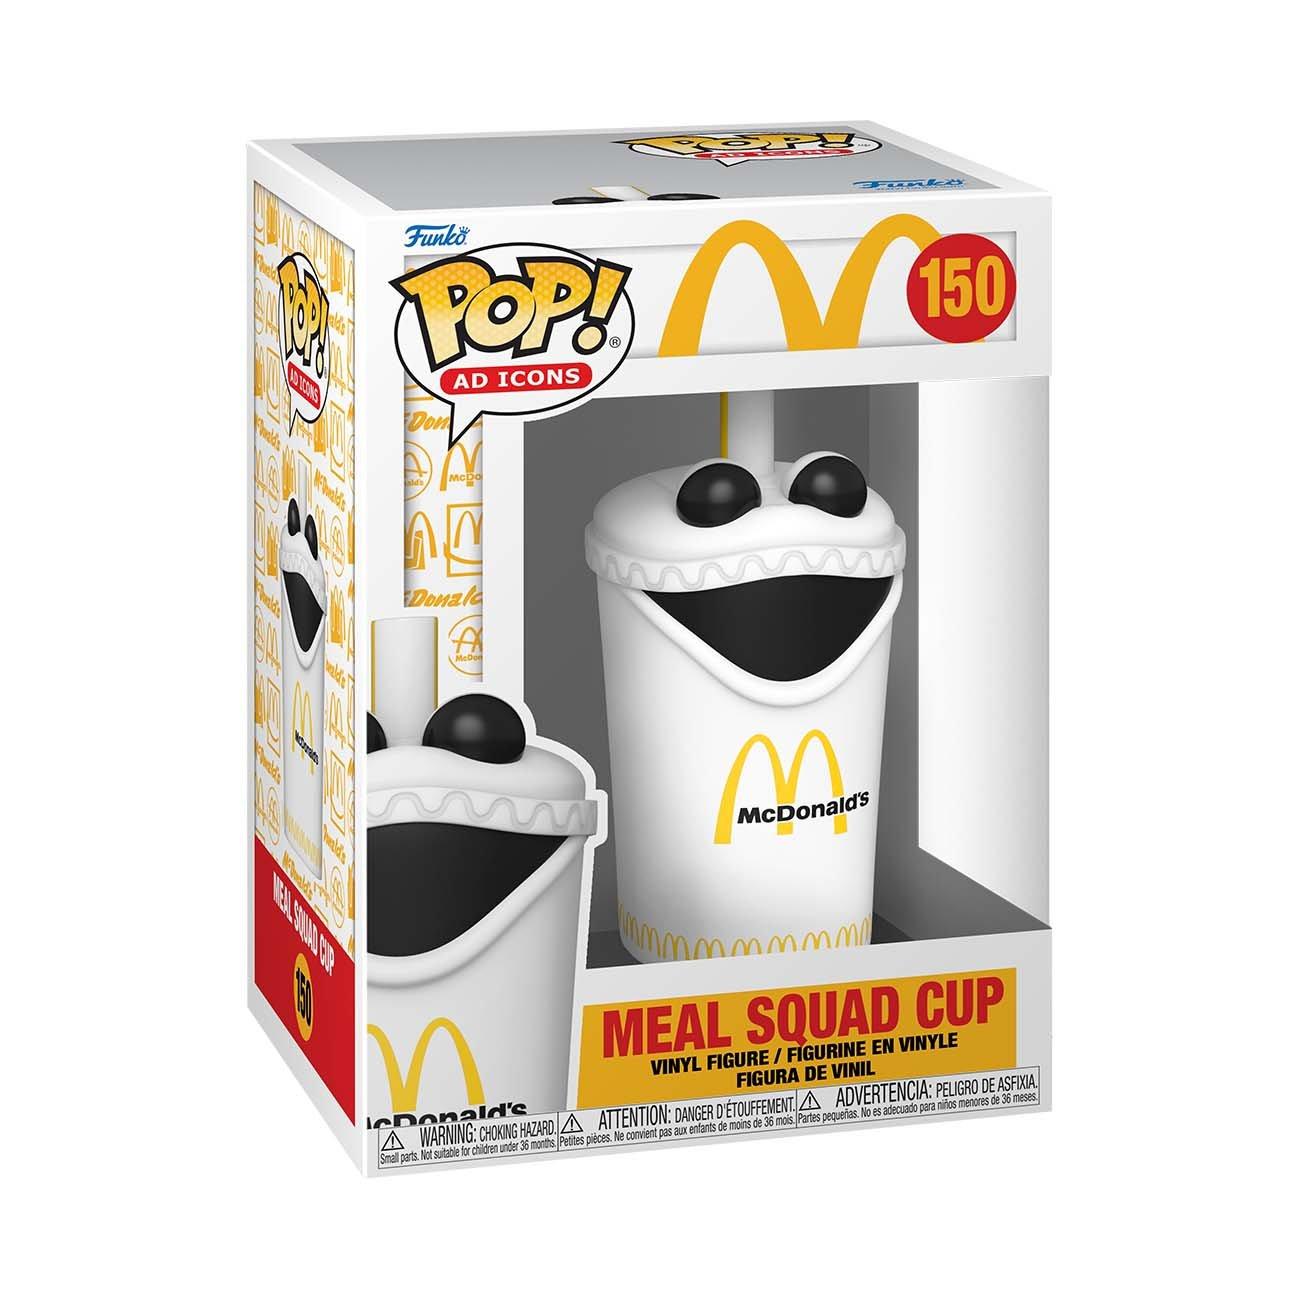 Funko POP! Ad Icons: McDonald's Meal Squad Cup 3.93-in Vinyl Figure